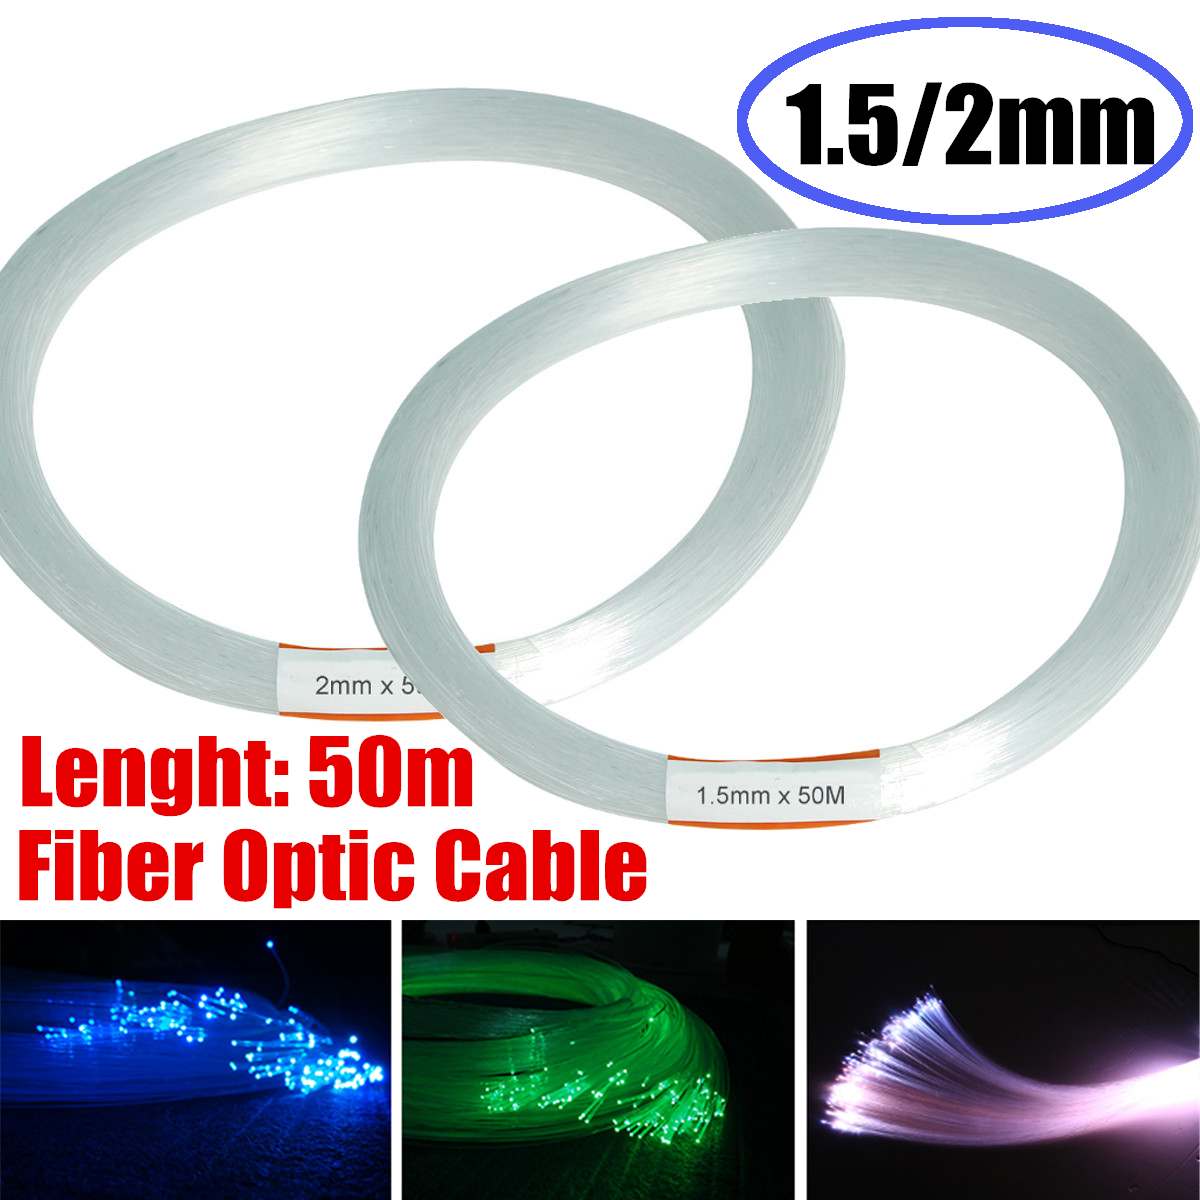 50m/164ft PMMA Clear Optic Cable Fiber Light End Grow LED Light Guide Kit DIY Holiday Festival Commercial Lighting 1.5mm/2mm